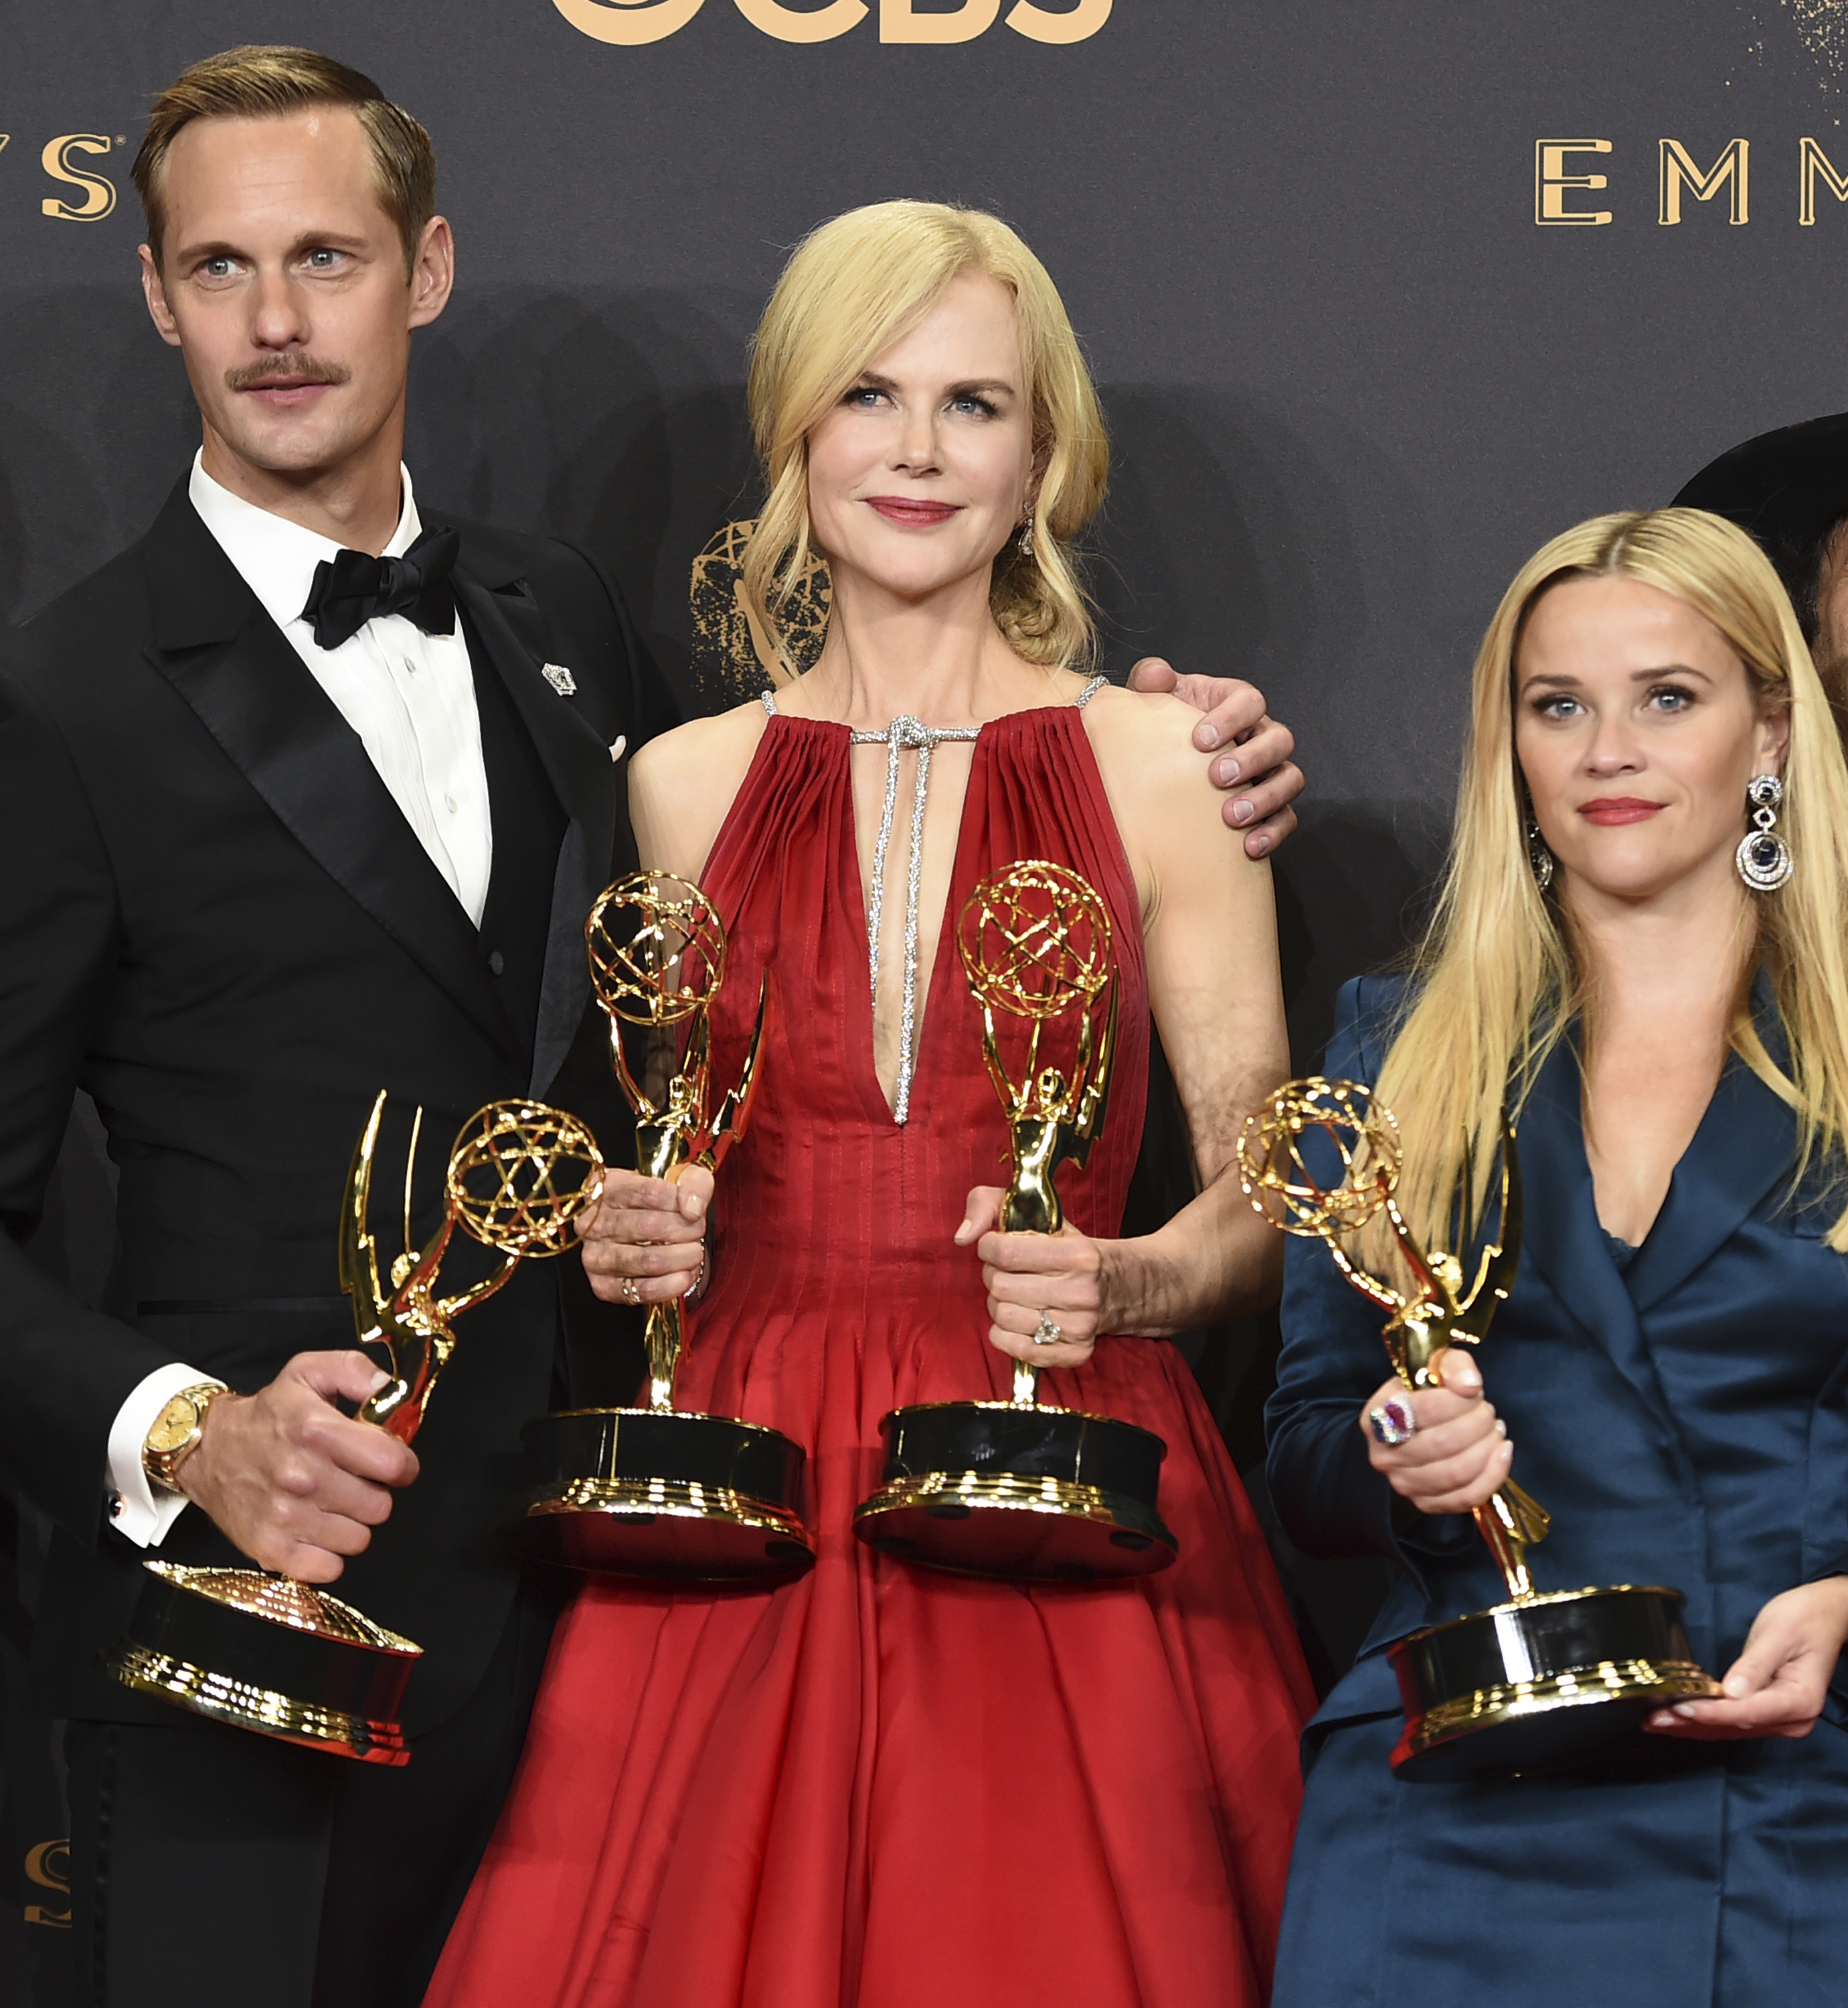 Alexander Skarsgard, Nicole Kidman, and Resse Witherspoon pose with their awards (Jordan Strauss/Invision/AP)